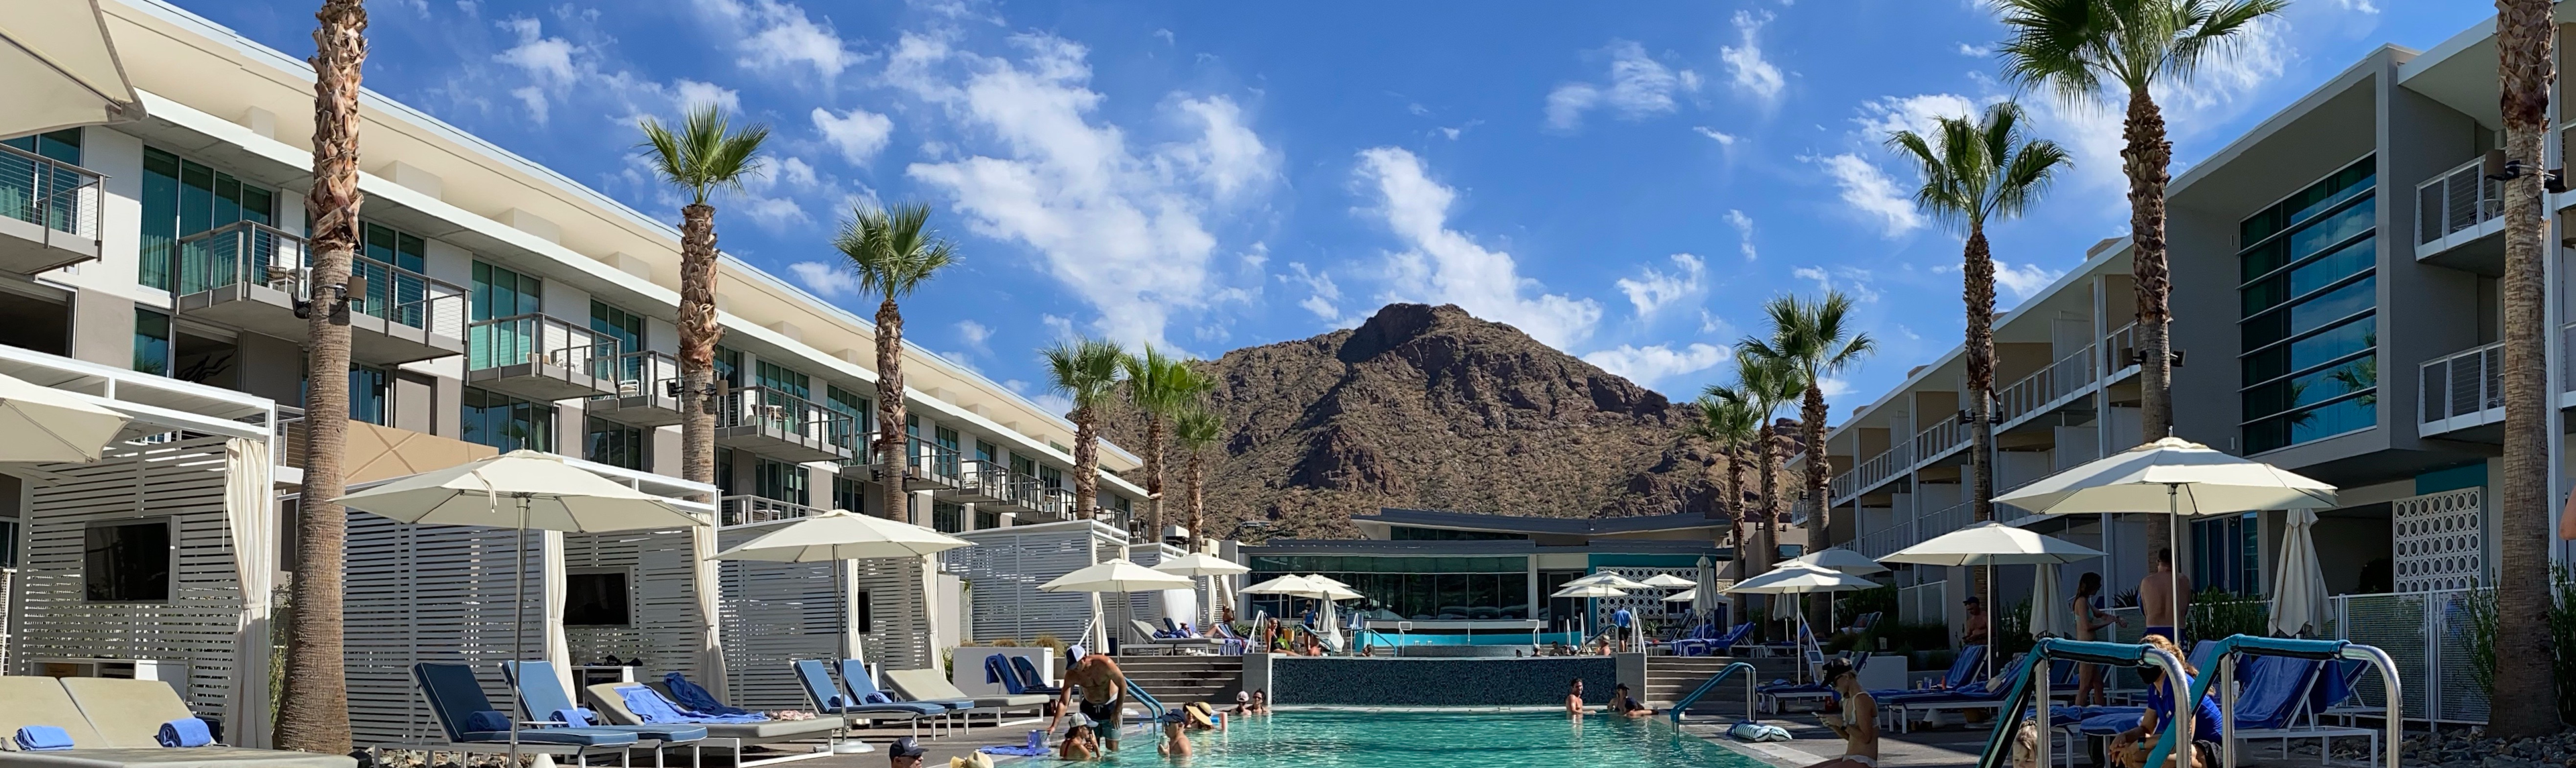 A view of Camelback Mountain from Mountain Shadows Resort.